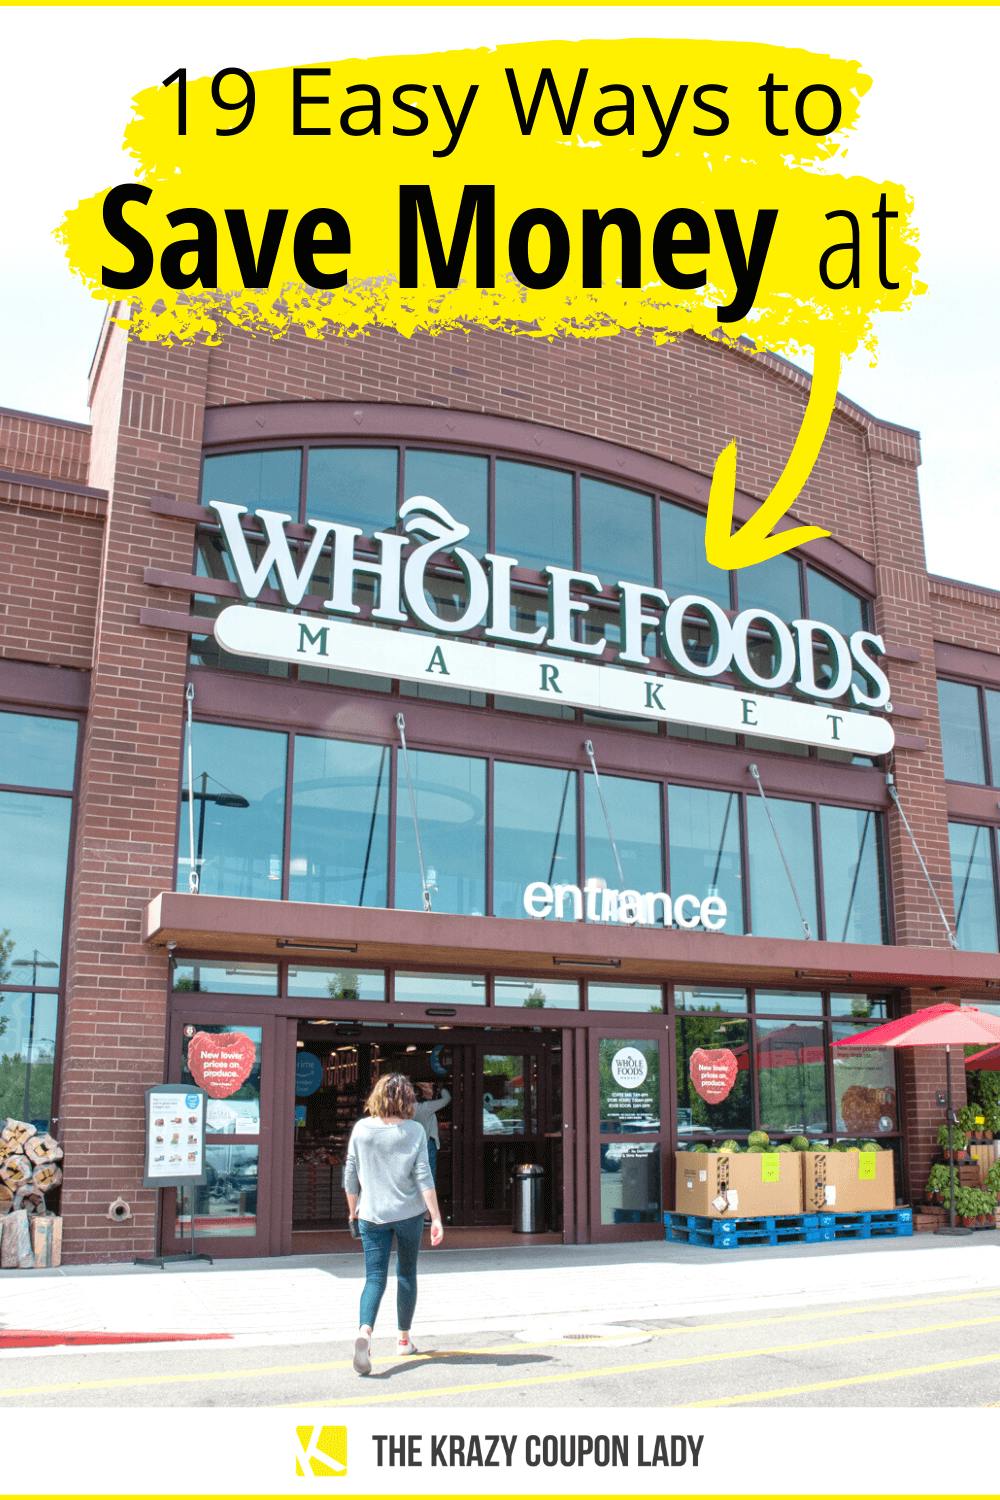 22 Ways to Save Money at Whole Foods